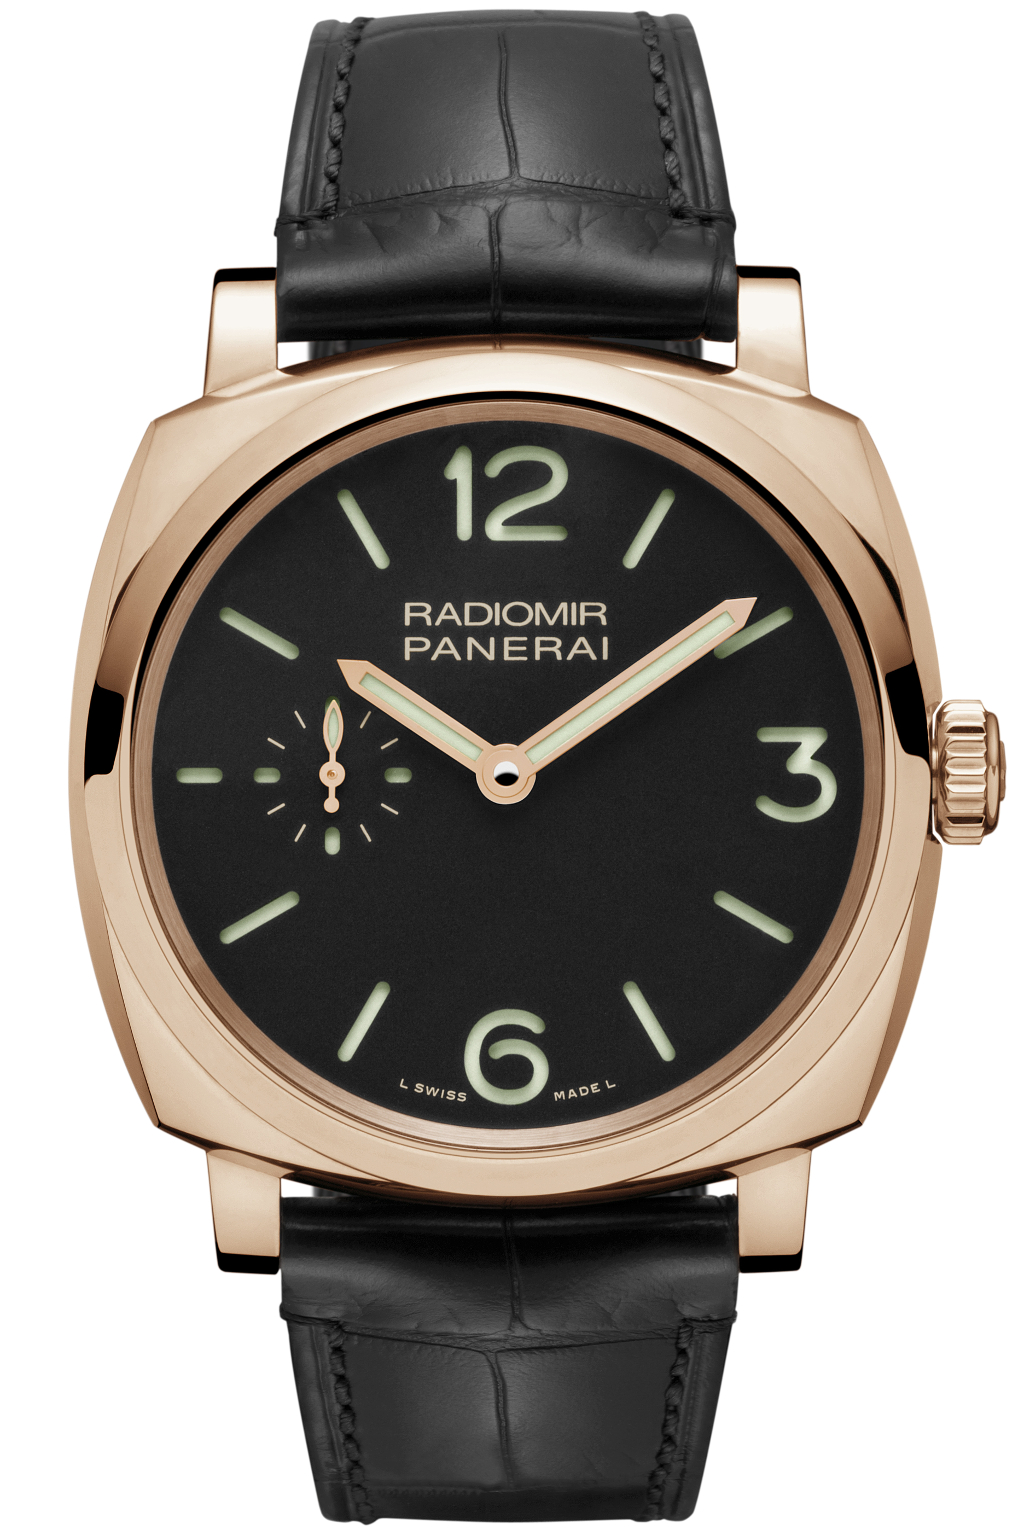 PAM00575 - Front